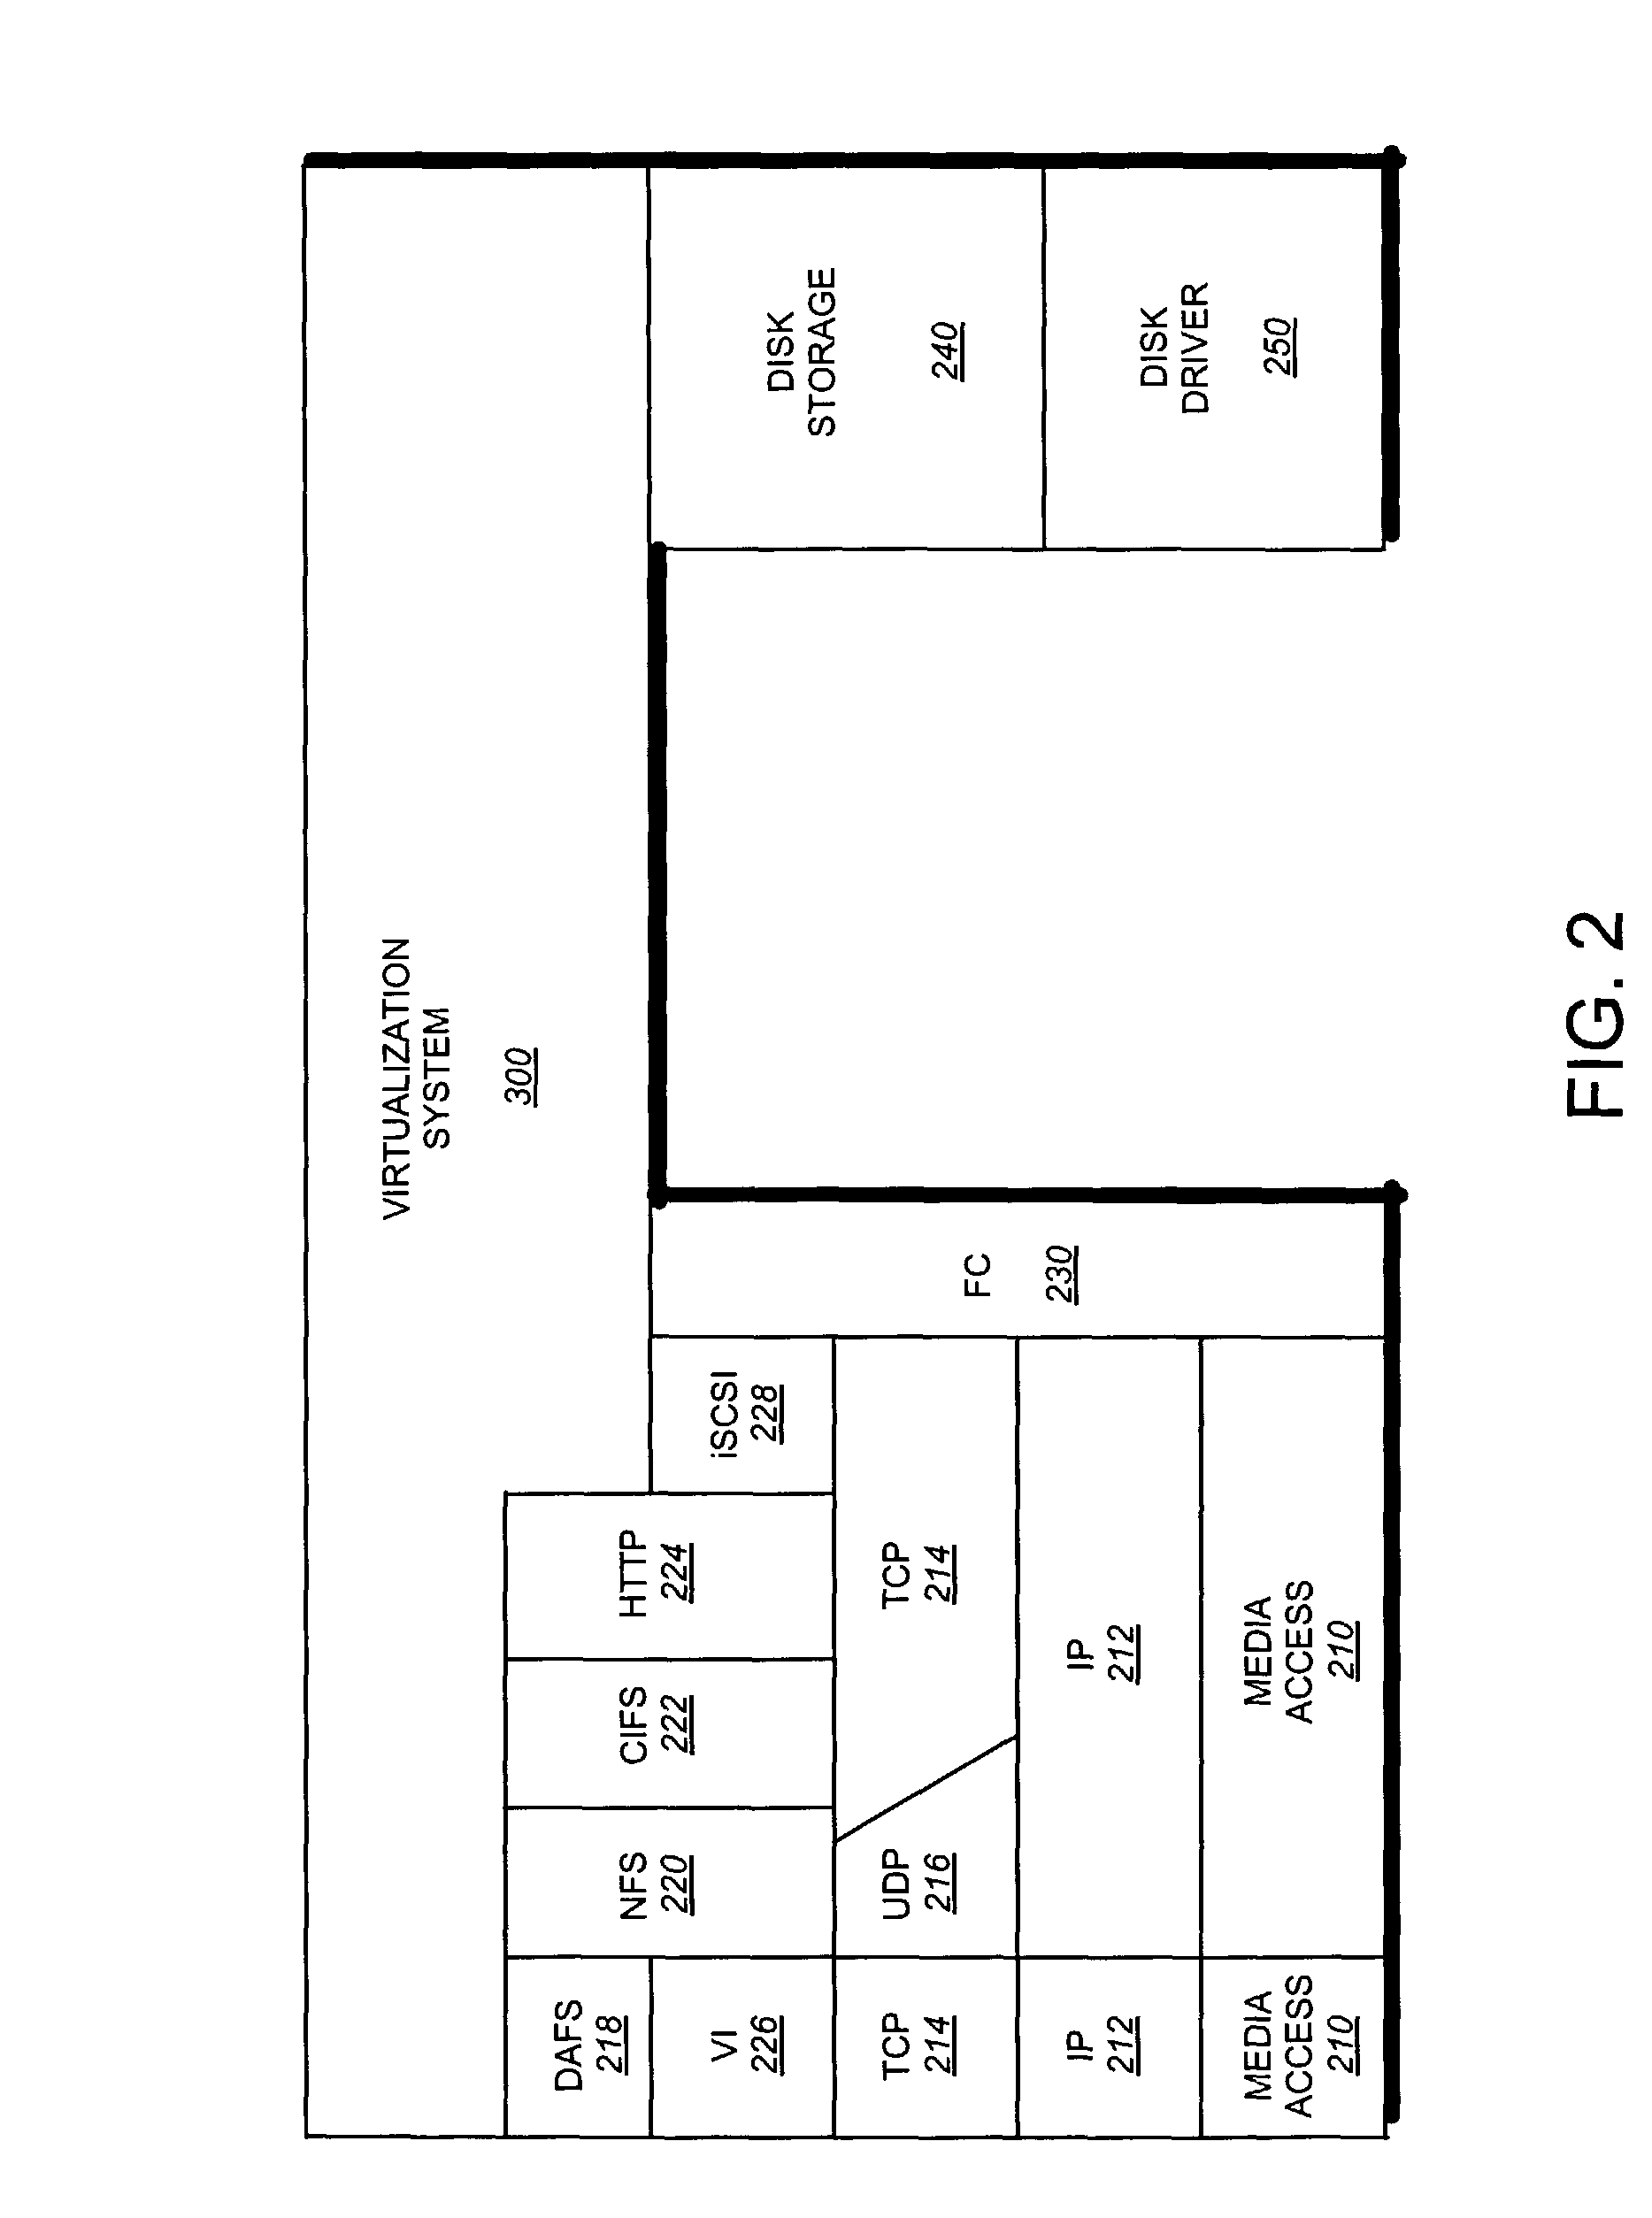 Multi-protocol storage appliance that provides integrated support for file and block access protocols